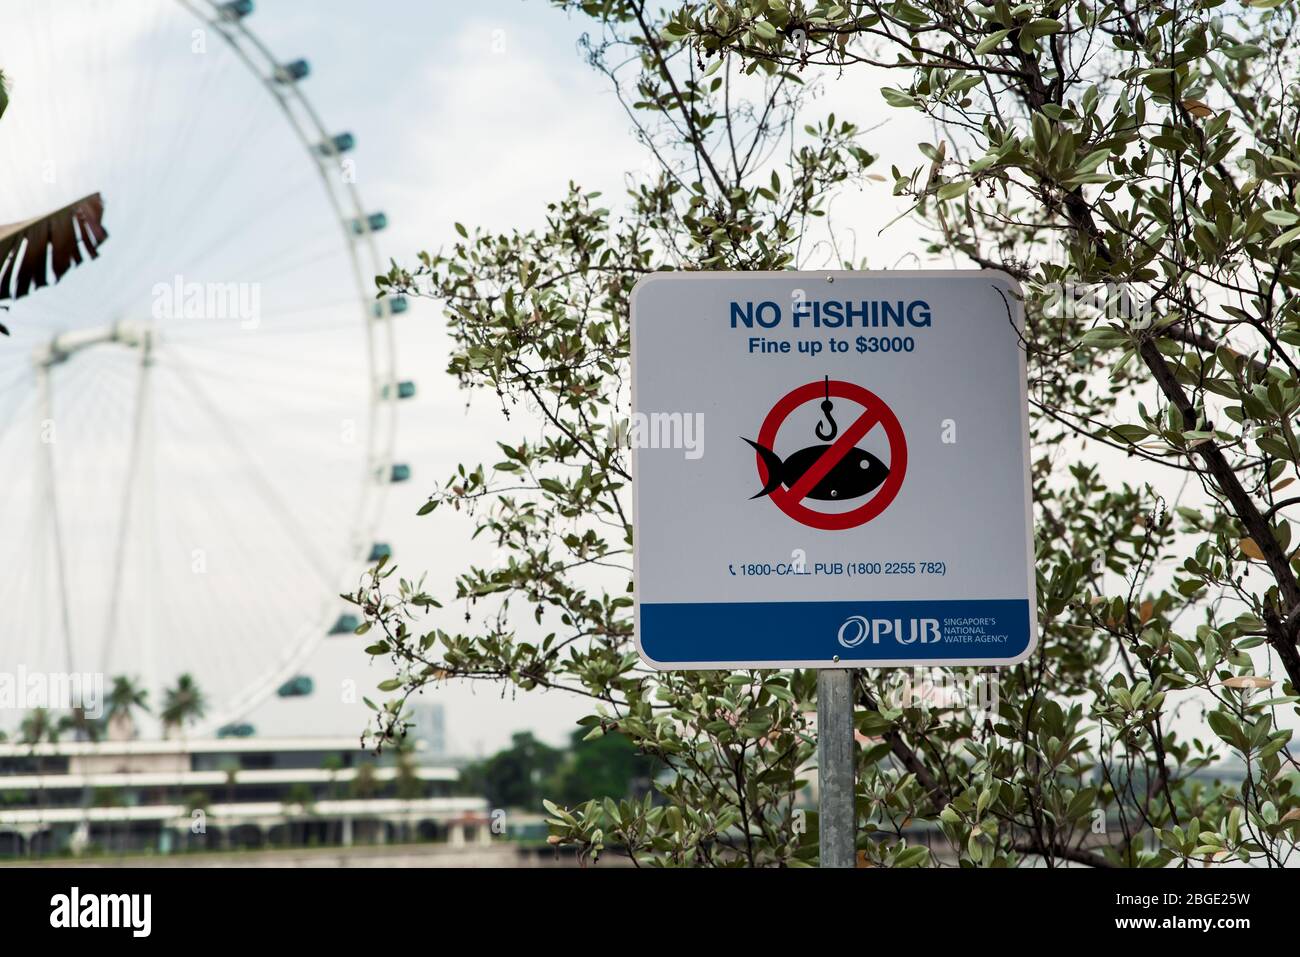 Singapore, Oct 2019: No fishing warning sign in public park. Fishing not allowed in this area with fine up to $3000 Stock Photo